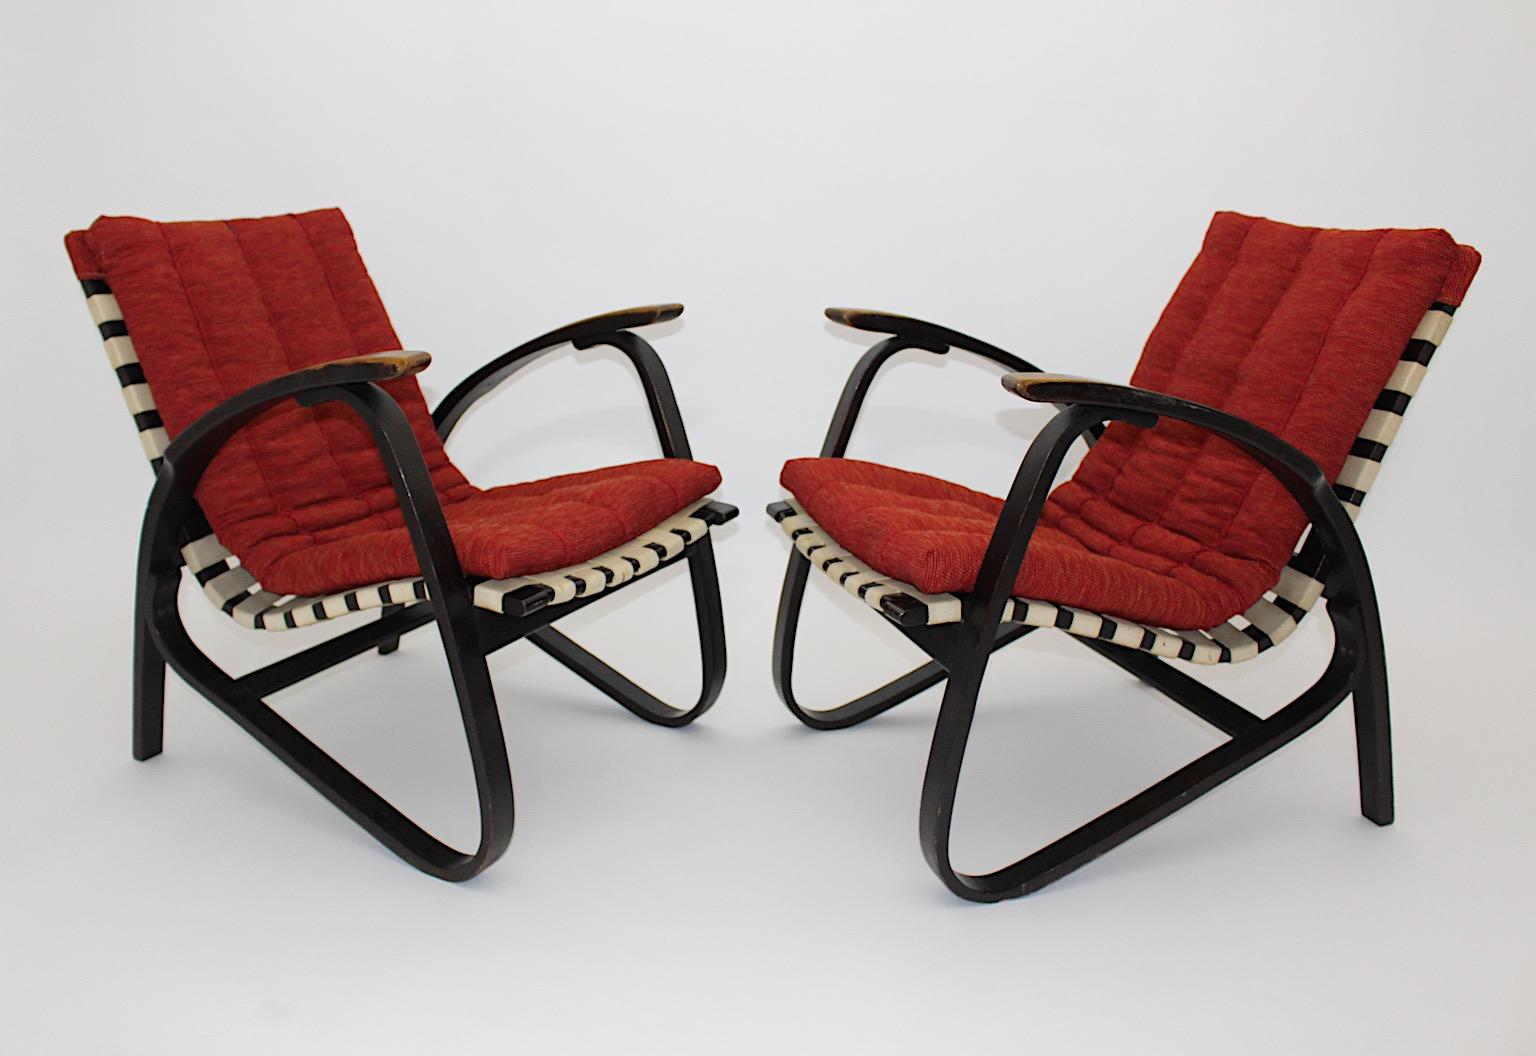 Art Deco Vintage Lounge Chairs Red Upholstery Pair Duo Jan Vanek 1940s For Sale 3